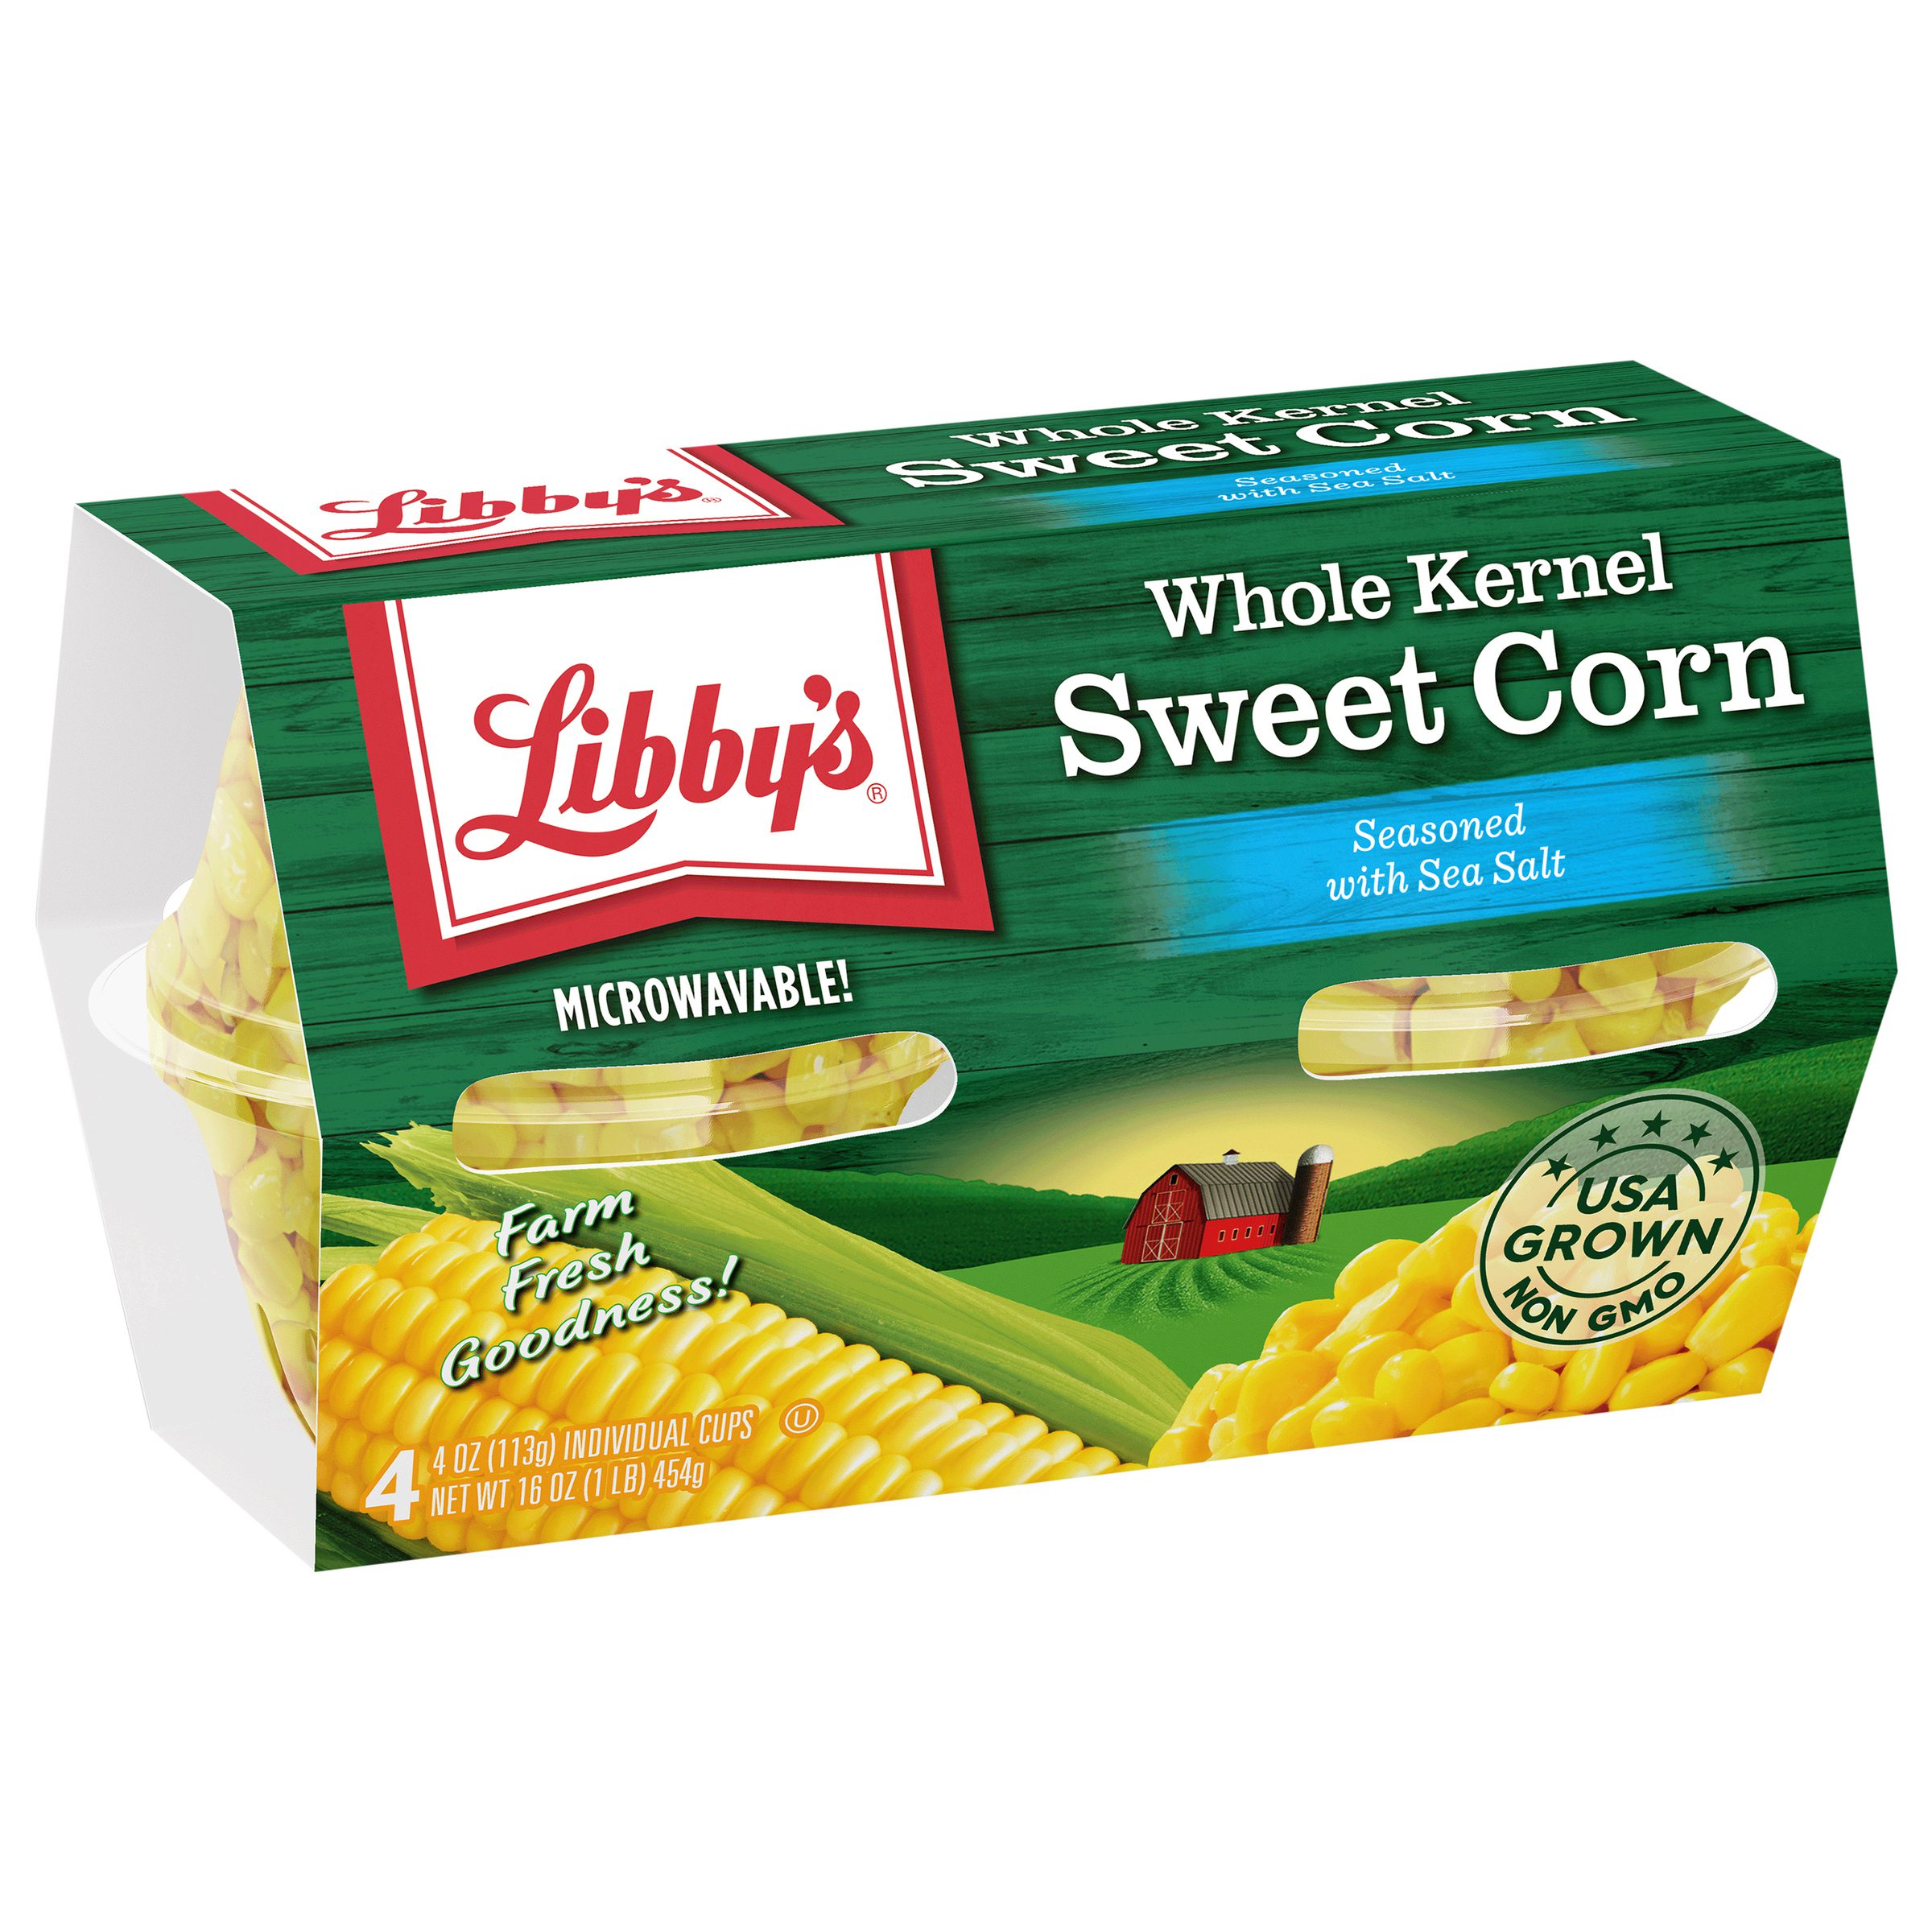 Whole Kernel Sweet Corn, 4 oz. Cups, 4-Pack